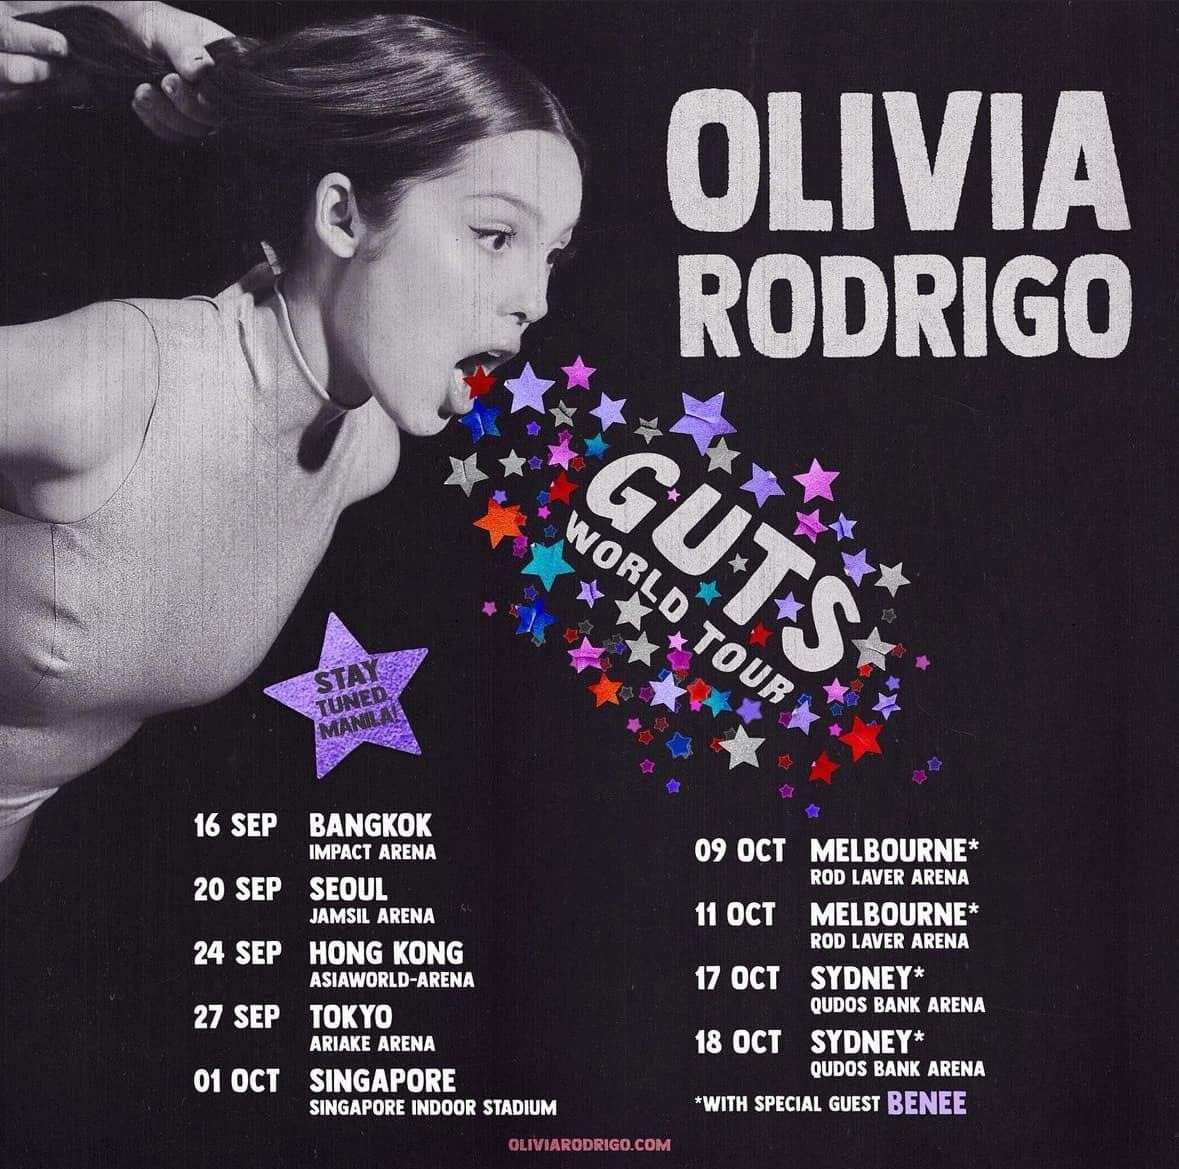 The American songstress, Olivia Rodrigo announced the Asian and Australian  legs of her ongoing Guts world tour – and Singapore made the cut but not  Malaysia. : r/malaysia